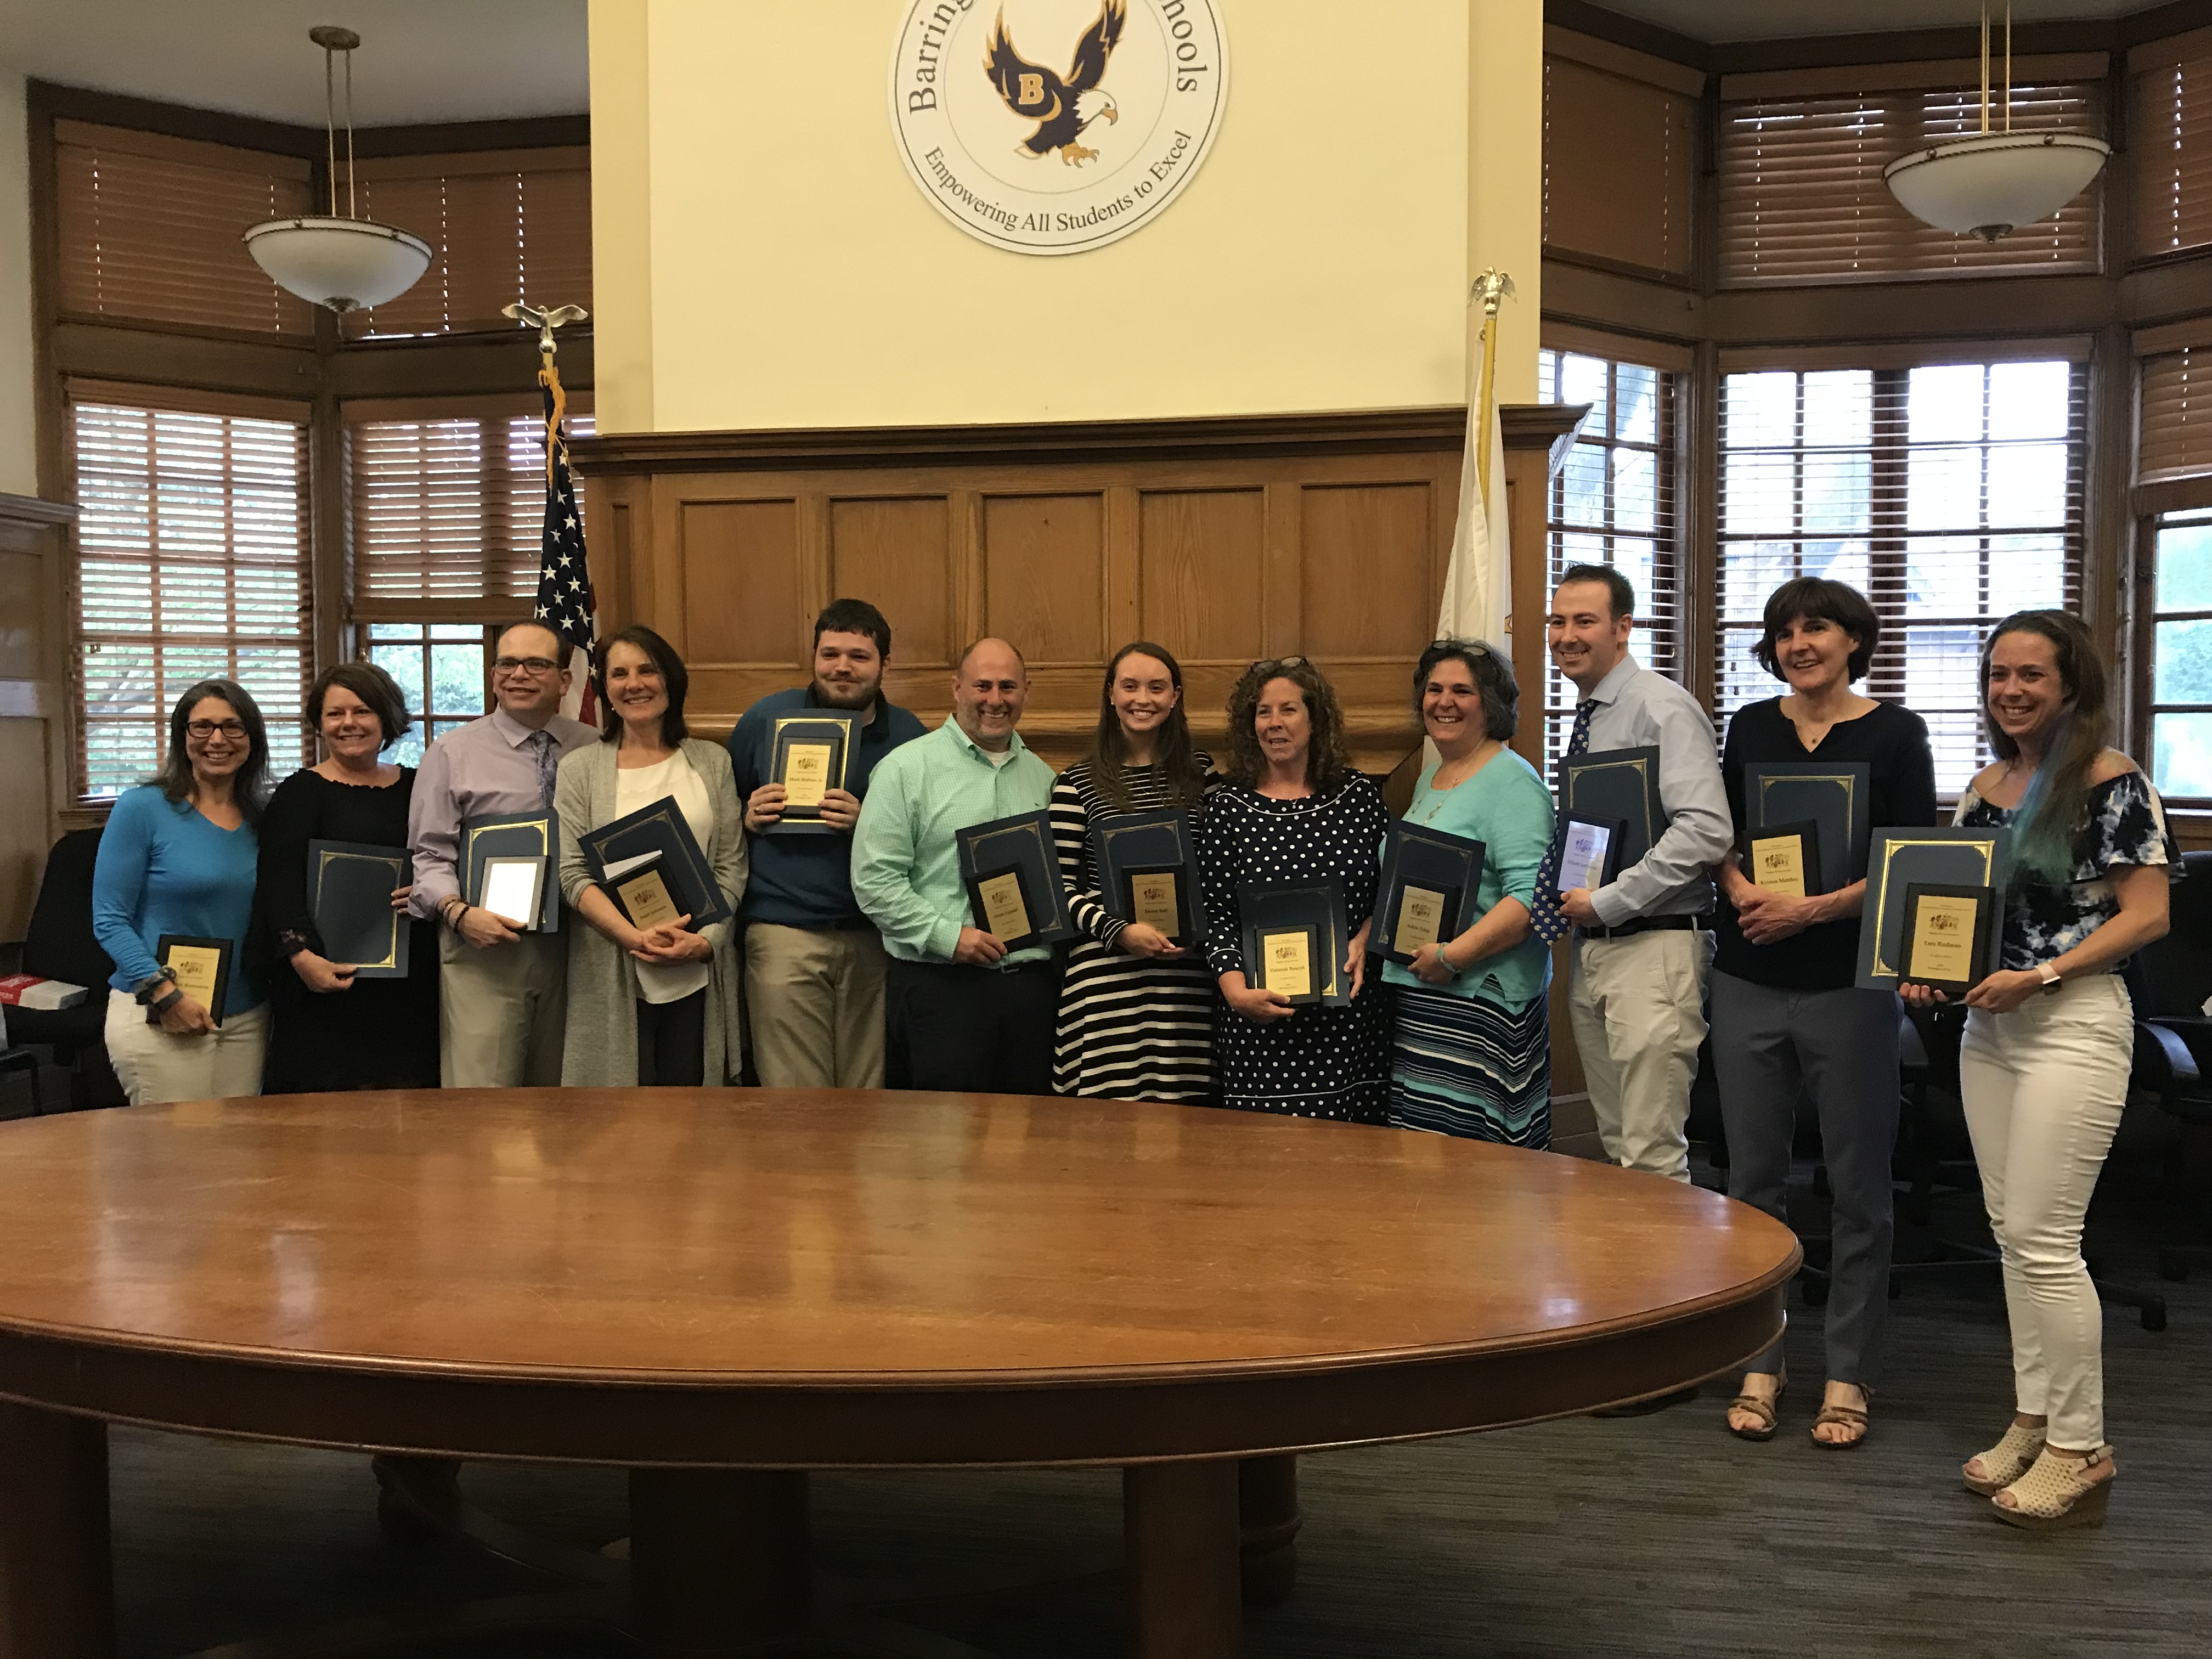 A photo of the 2018-19 winners of the SEAC Special Educator Awards